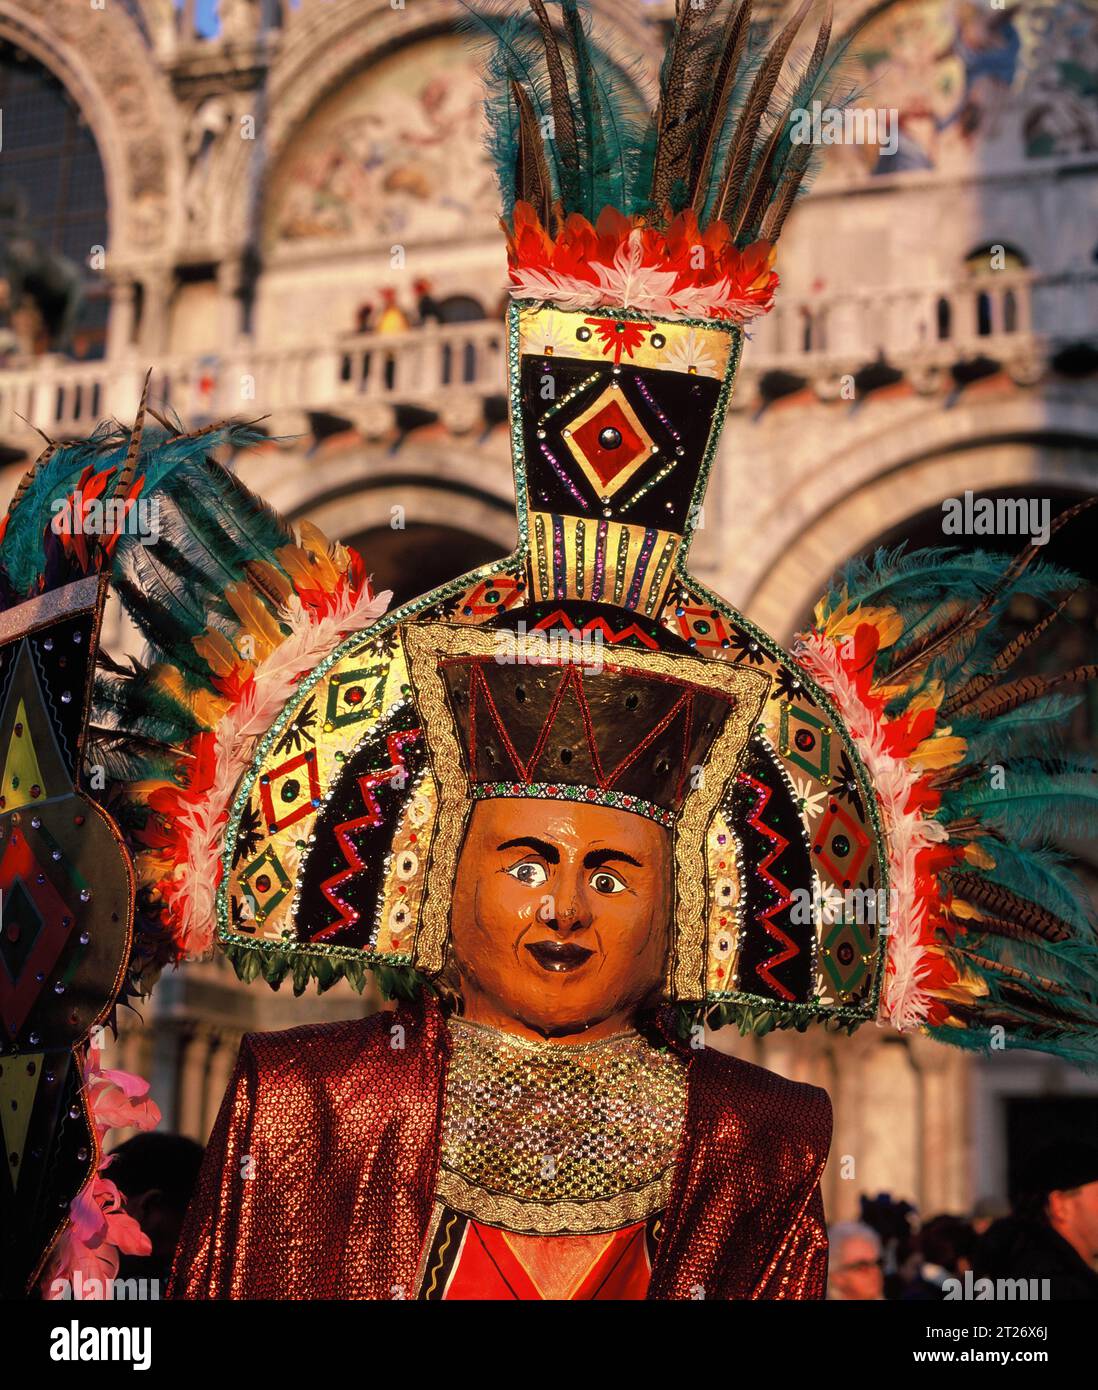 Italy. Venice. Carnival procession. Player in costume and mask. Stock Photo